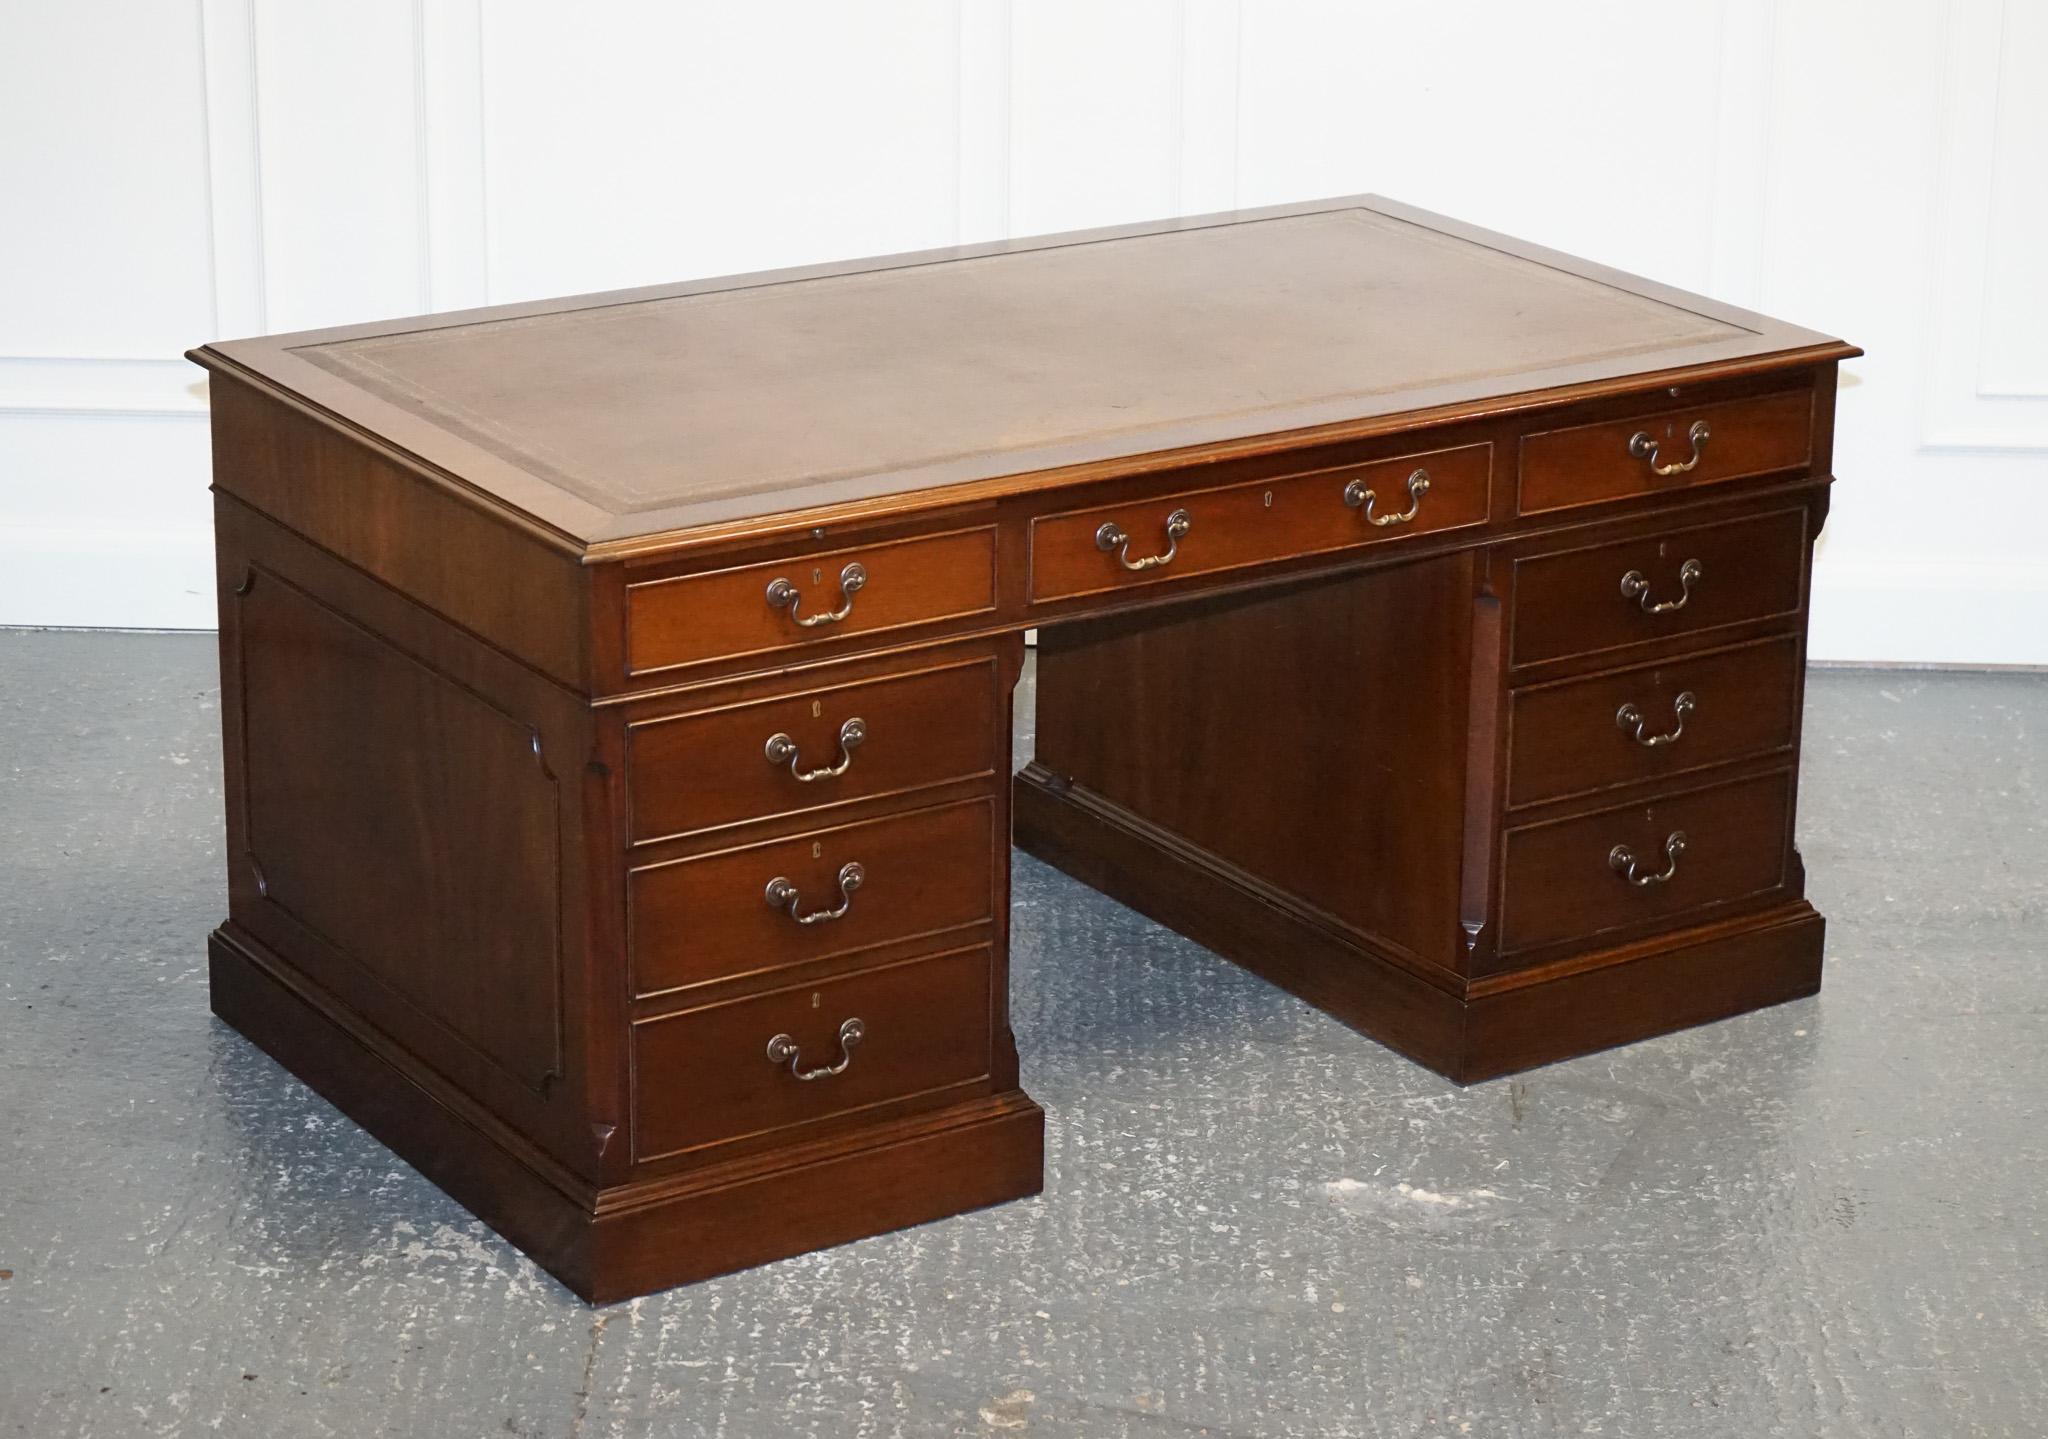 
We are delighted to offer for sale this Lovely Large Twin Pedestal Desk Brown Leather Top With Sliding out trays.

A Large Twin Pedestal Desk with a Brown Leather Top and Sliding Out Trays on each pedestal is a luxurious and functional piece of